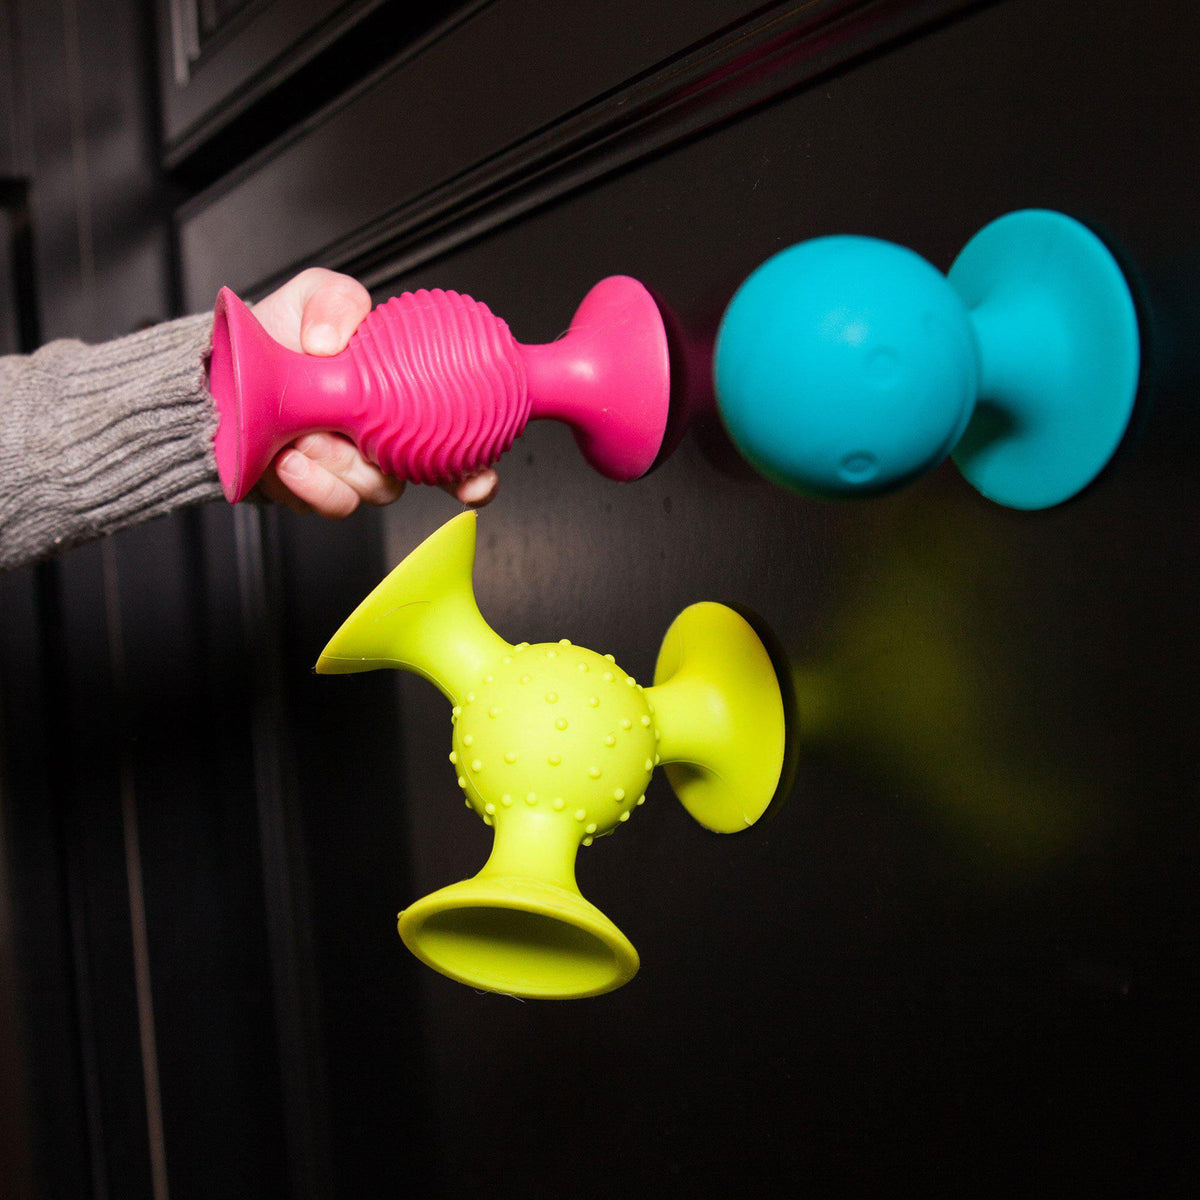 Colorful pipSquigs vertically suctioned onto black  cabinetry, with a child&#39;s hand grabbing the magenta one.